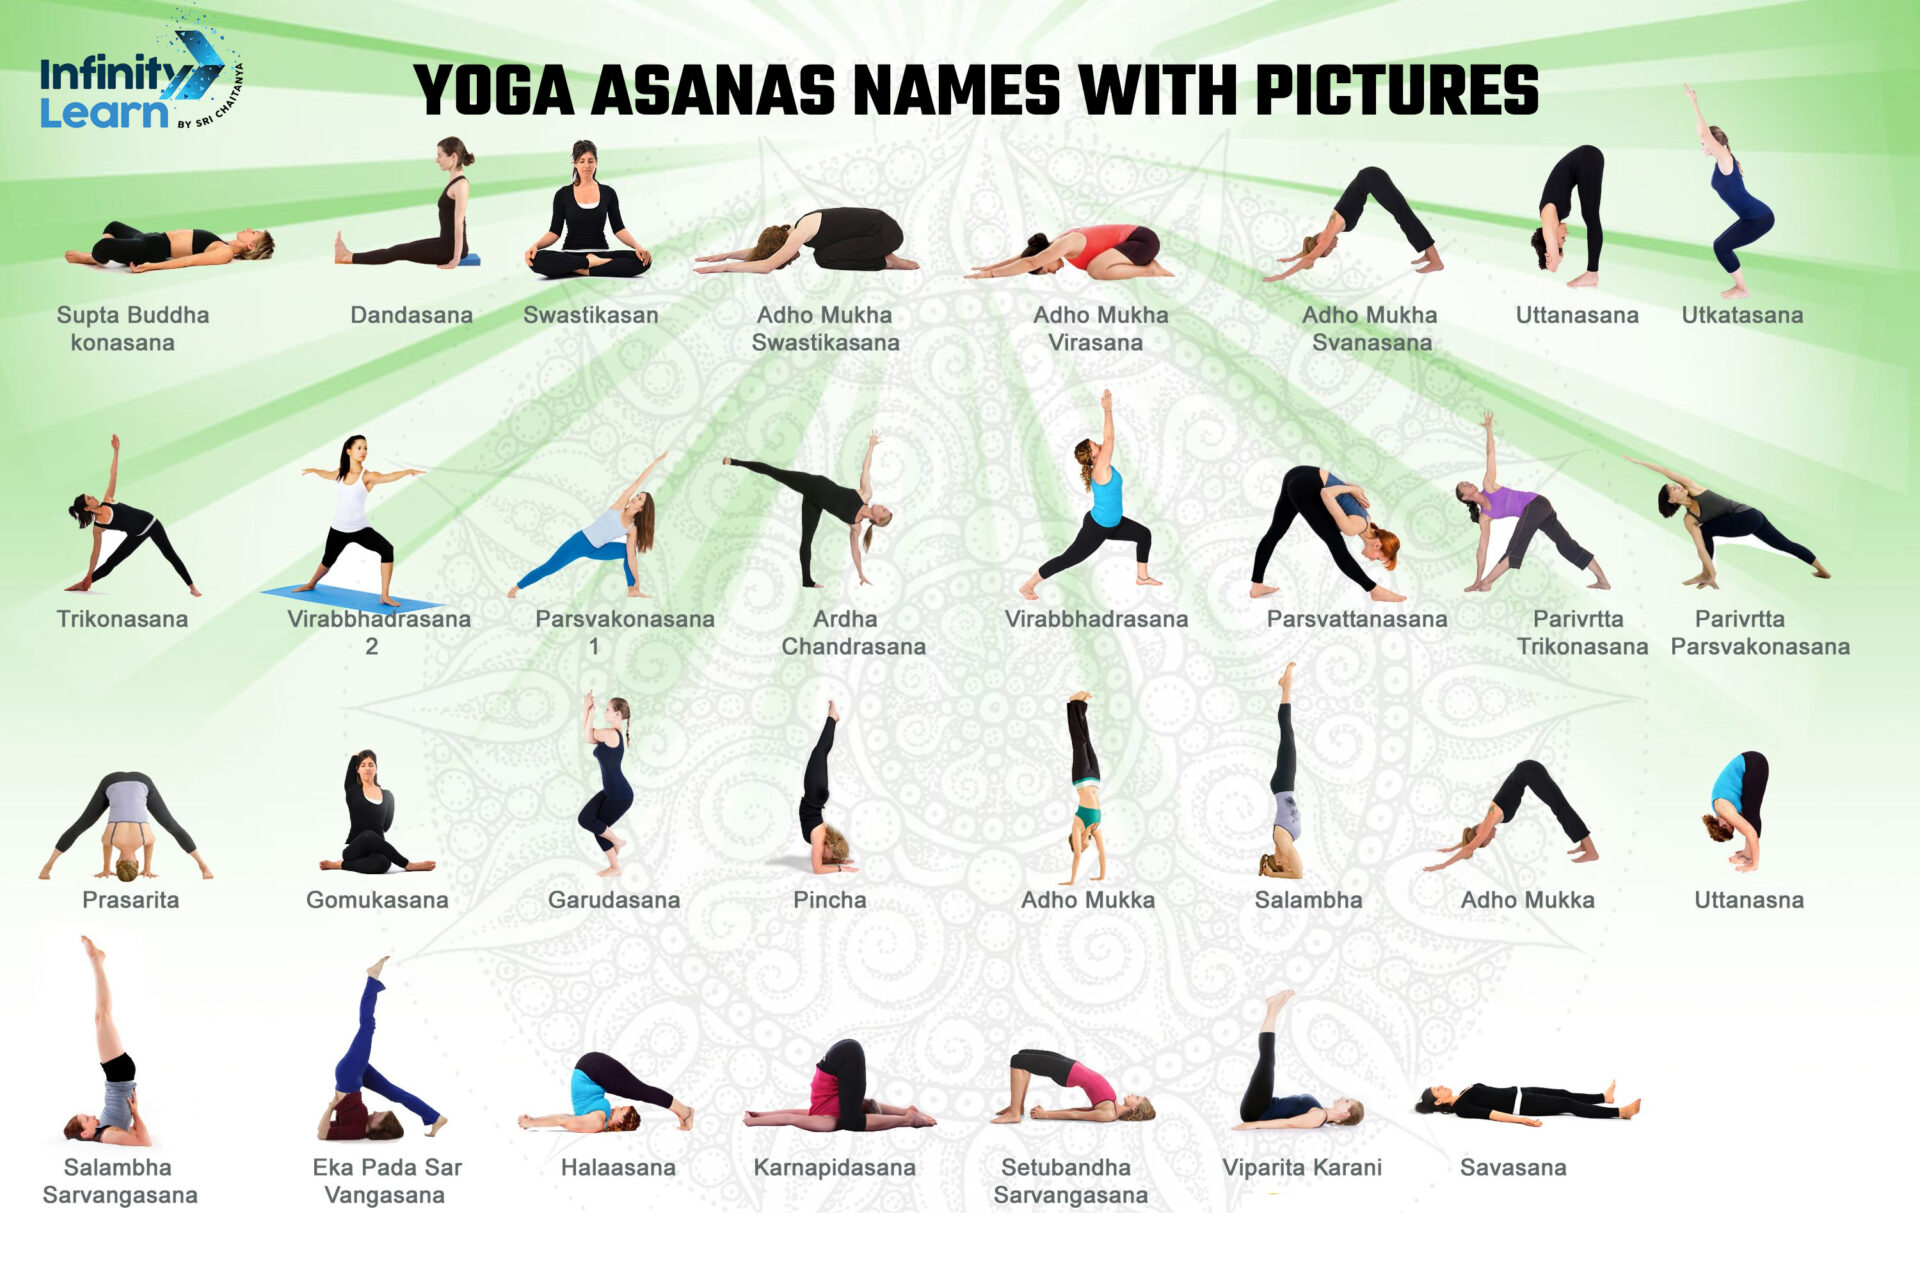 Yoga Asanas Images with Names